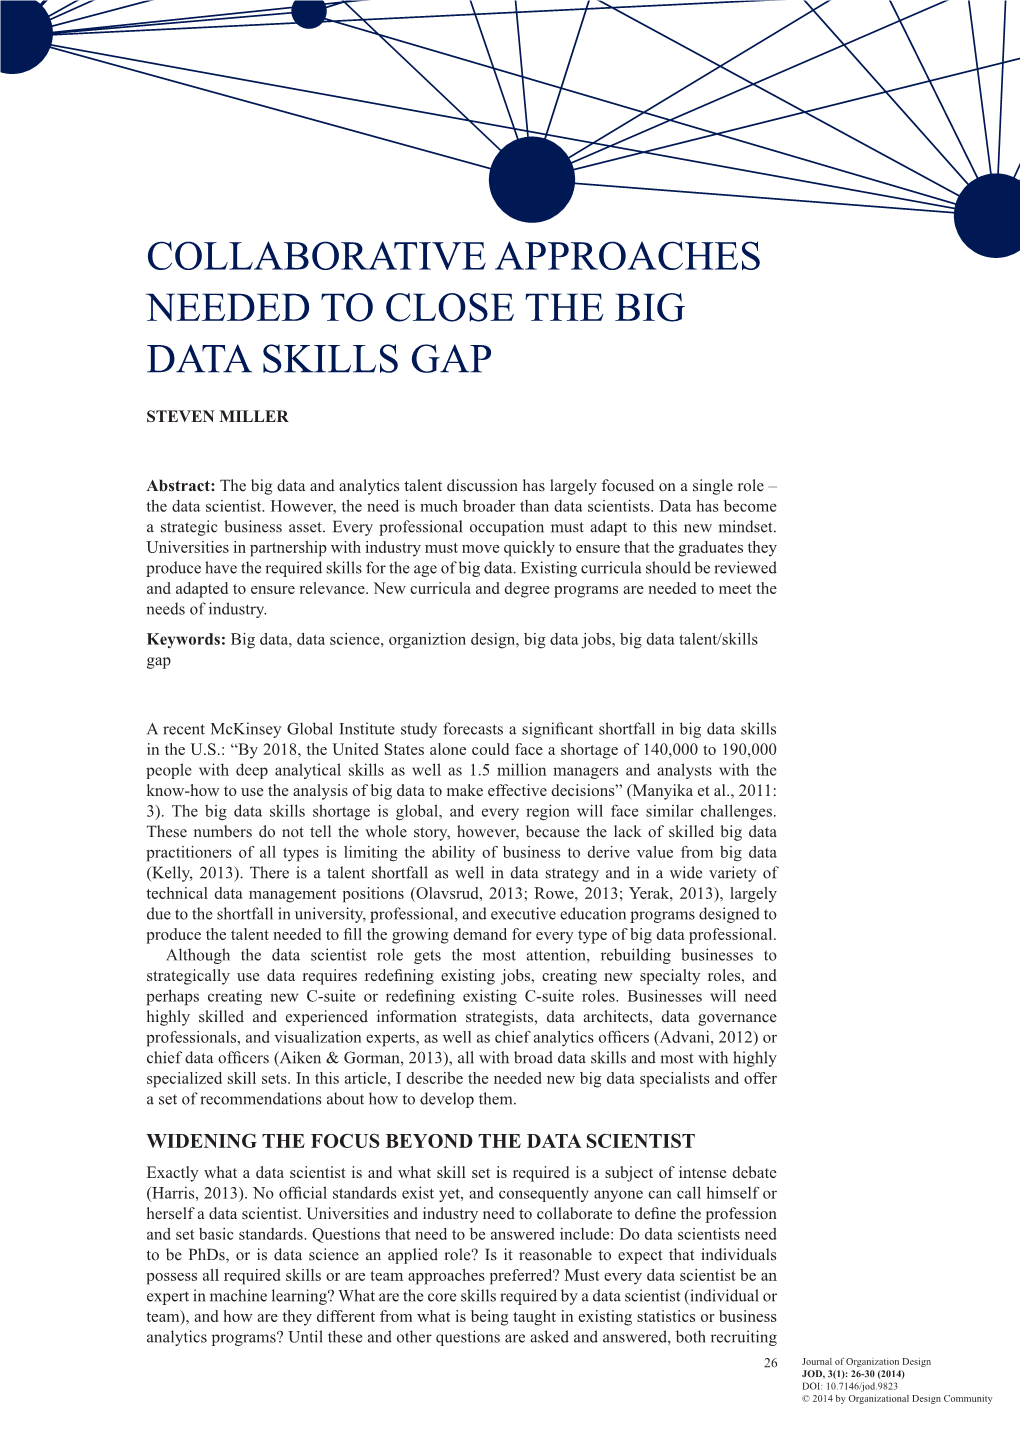 Collaborative Approaches Needed to Close the Big Data Skills Gap